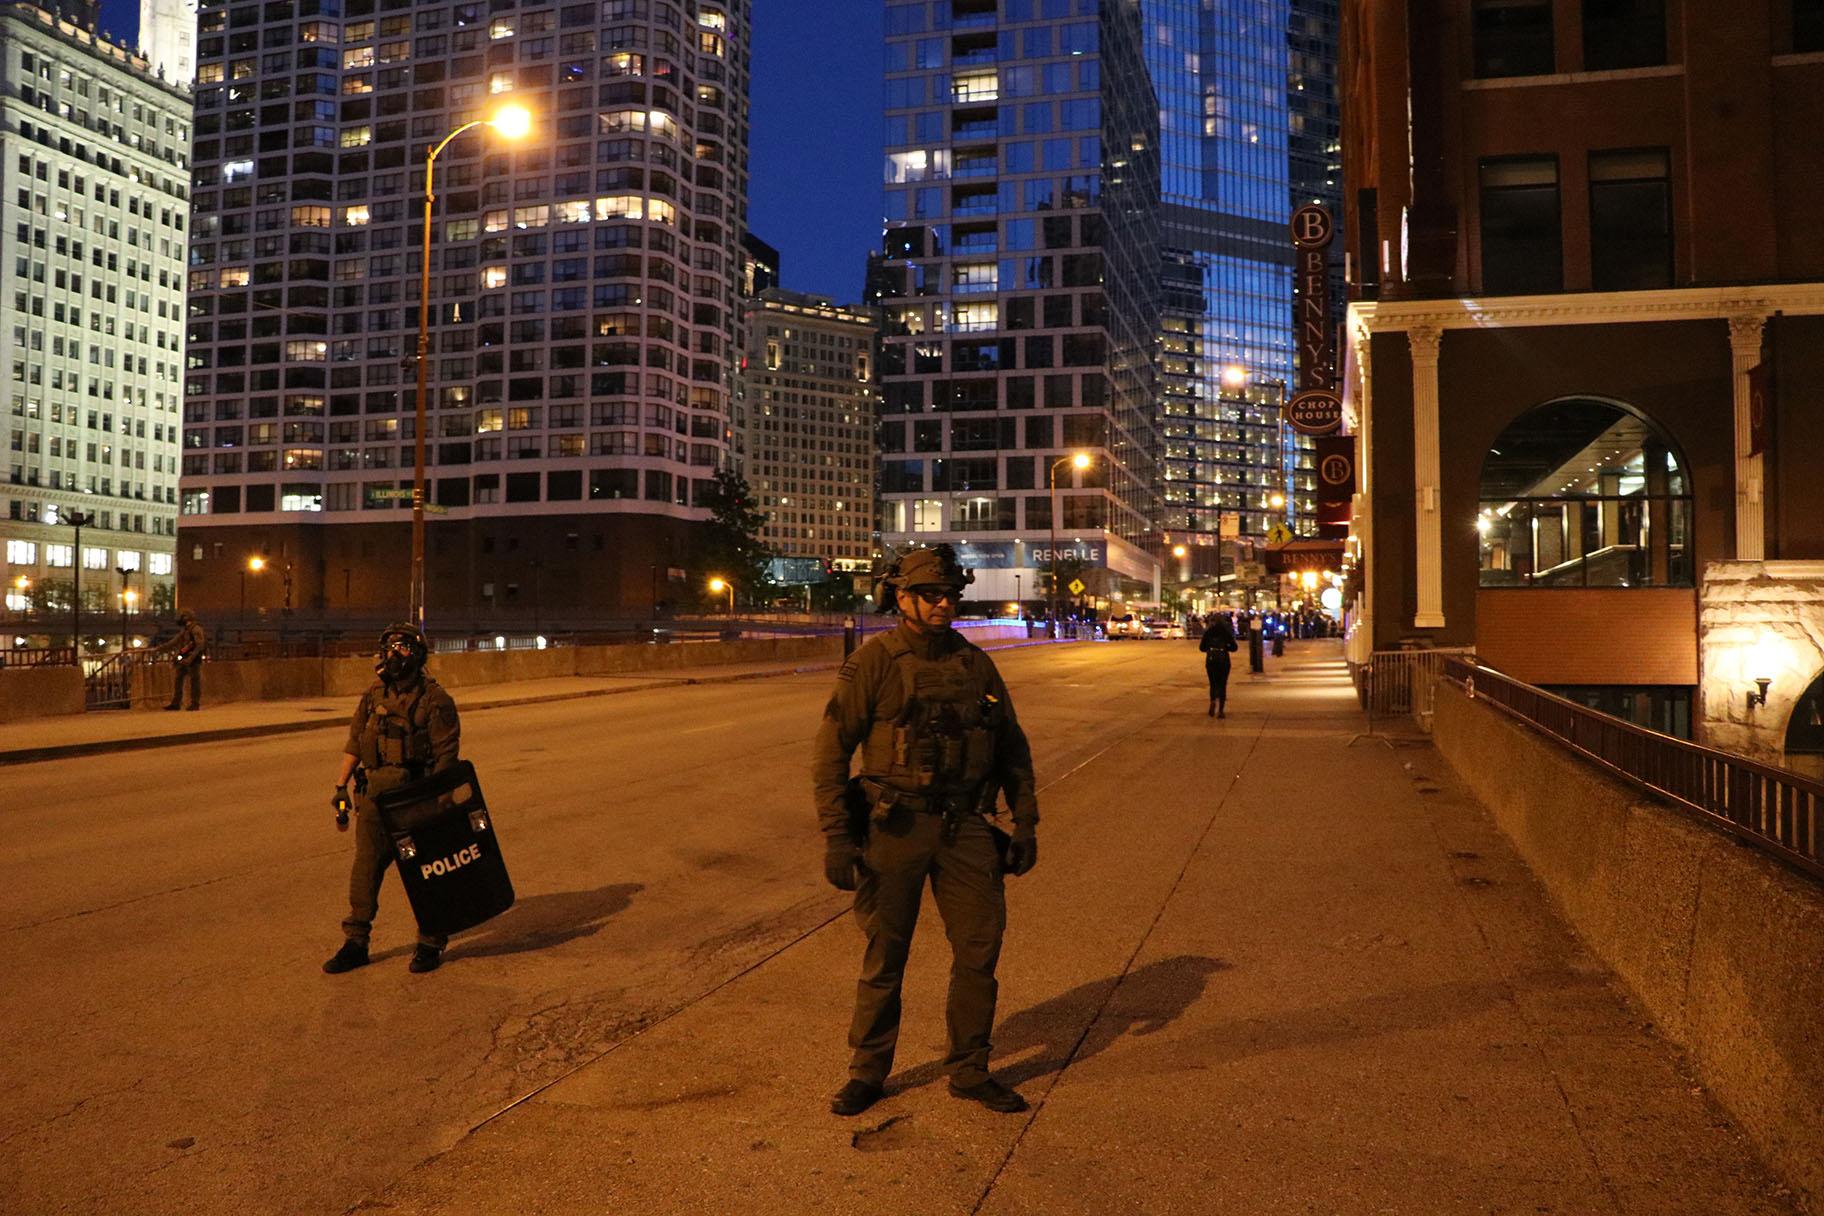 Two members of Chicago Police’s SWAT team block people from traveling northward on Wabash Avenue after the 9 p.m. curfew. Exceptions were made for people who live in the area. (Evan Garcia / WTTW News)